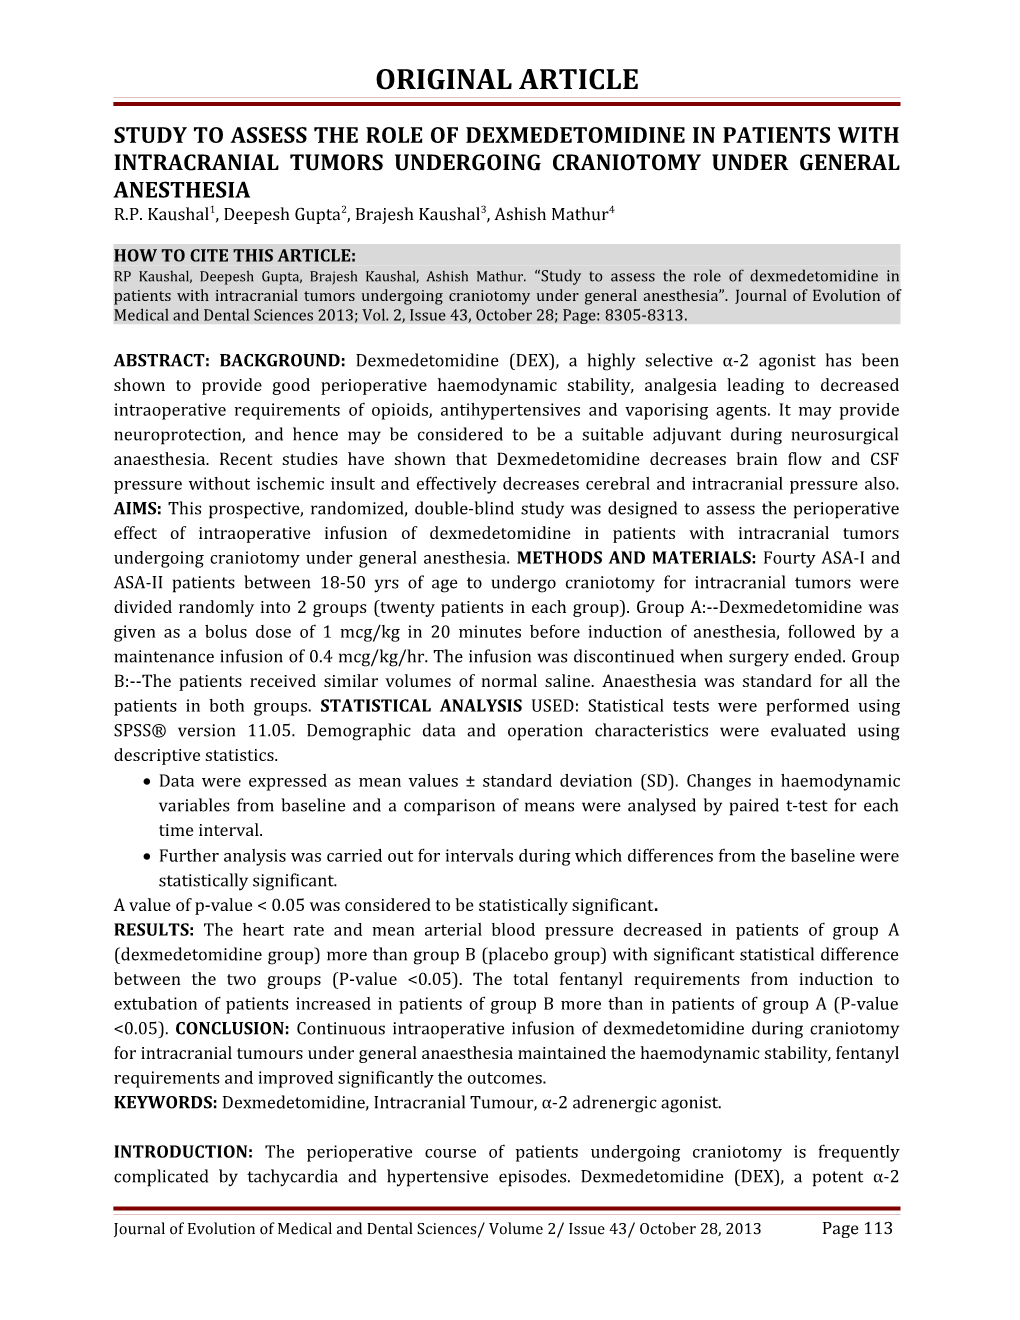 Study to Assess the Role of Dexmedetomidine in Patients with Intracranial Tumors Undergoing